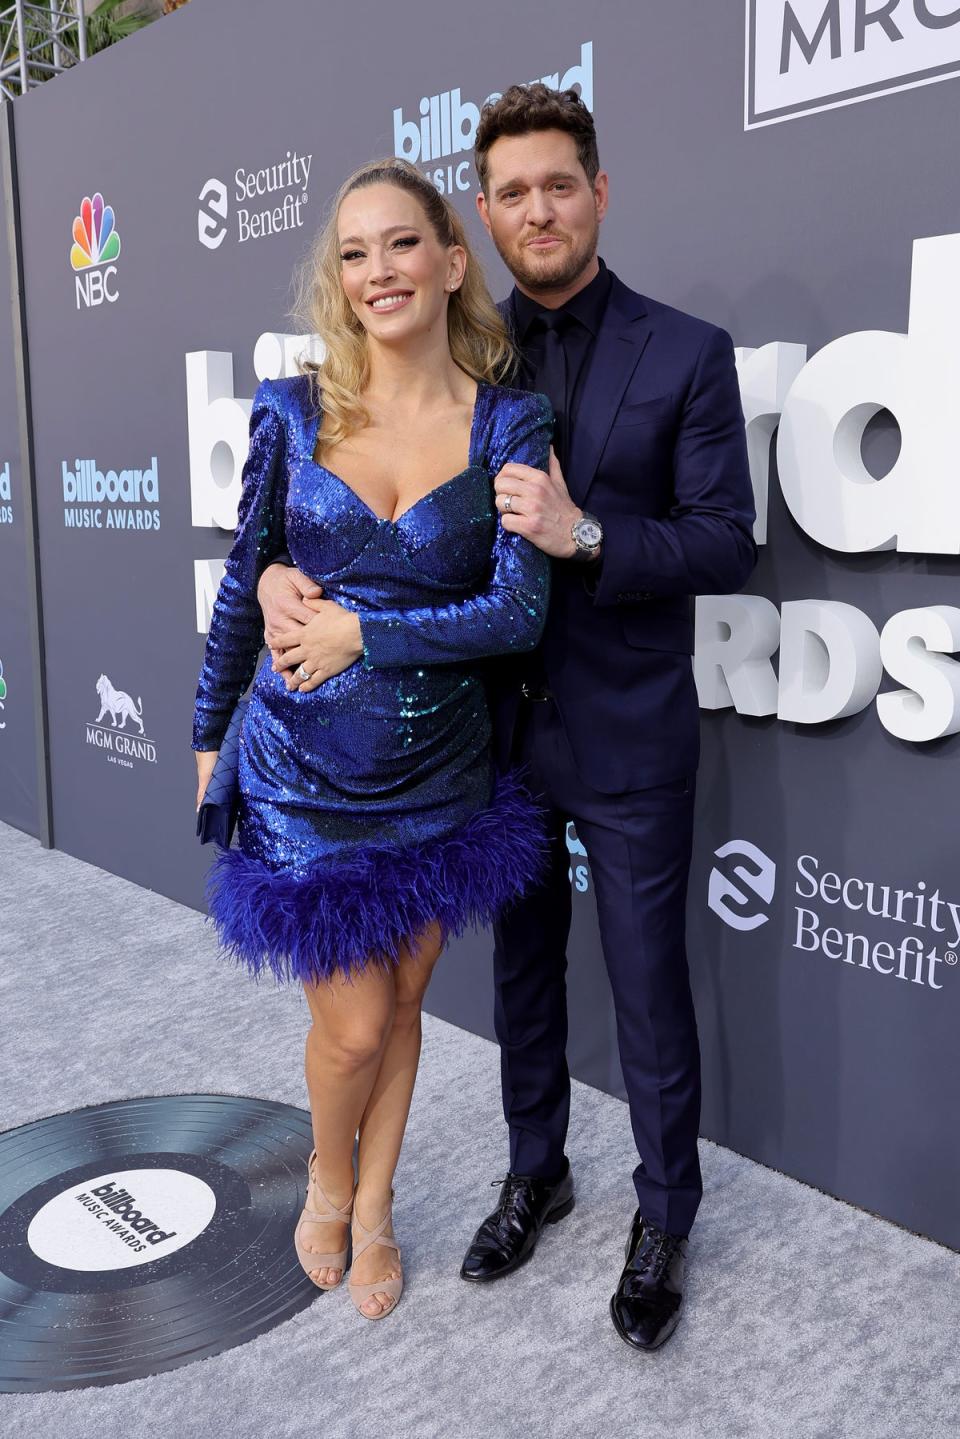 Luisana Lopilato and Michael BublÃ© attend the 2022 Billboard Music Awards at MGM Grand Garden Arena on May 15 2022 (Getty Images for MRC)